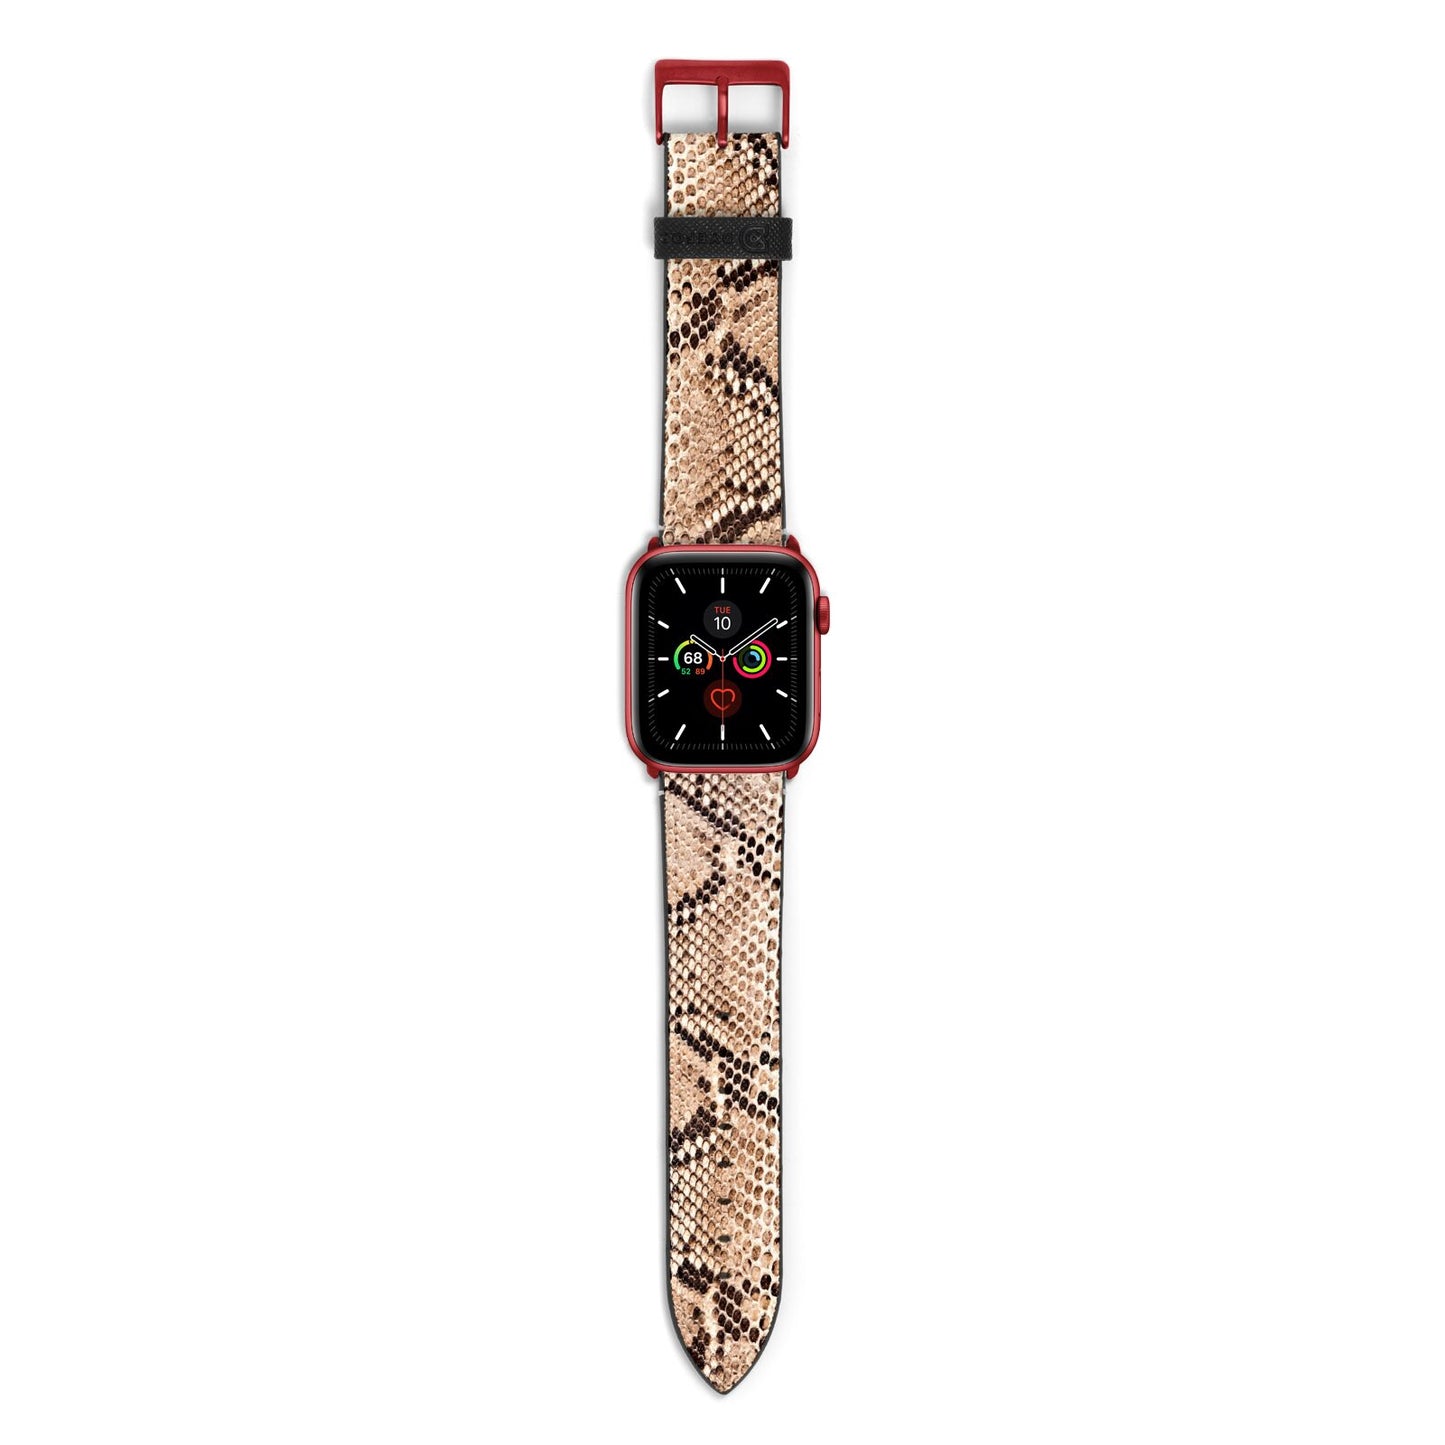 Snakeskin Apple Watch Strap with Red Hardware